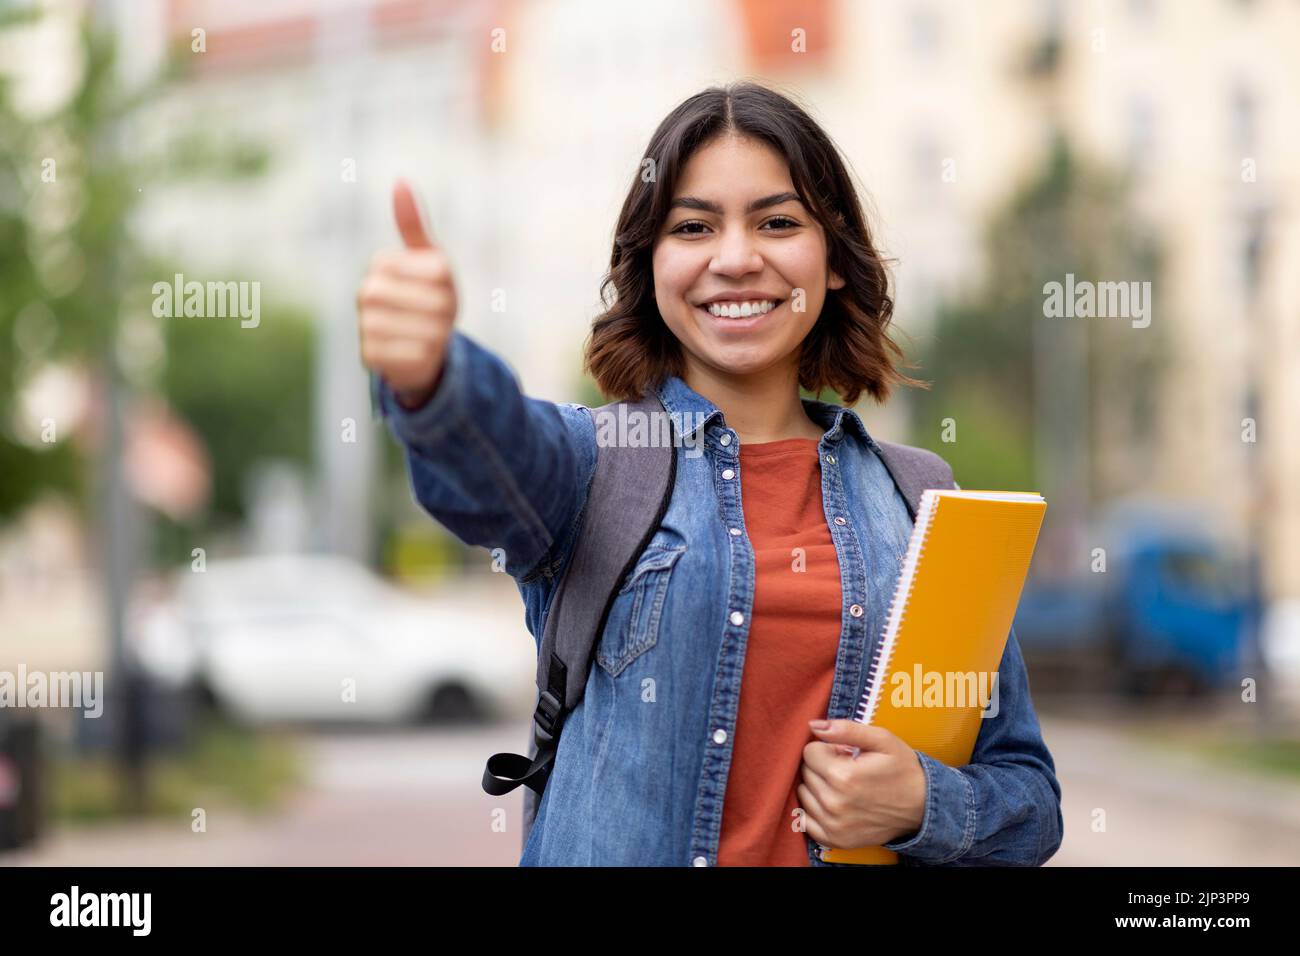 Smiling Arab Female Student Showing Thumb Up At Camera While Posing Outdoors Stock Photo